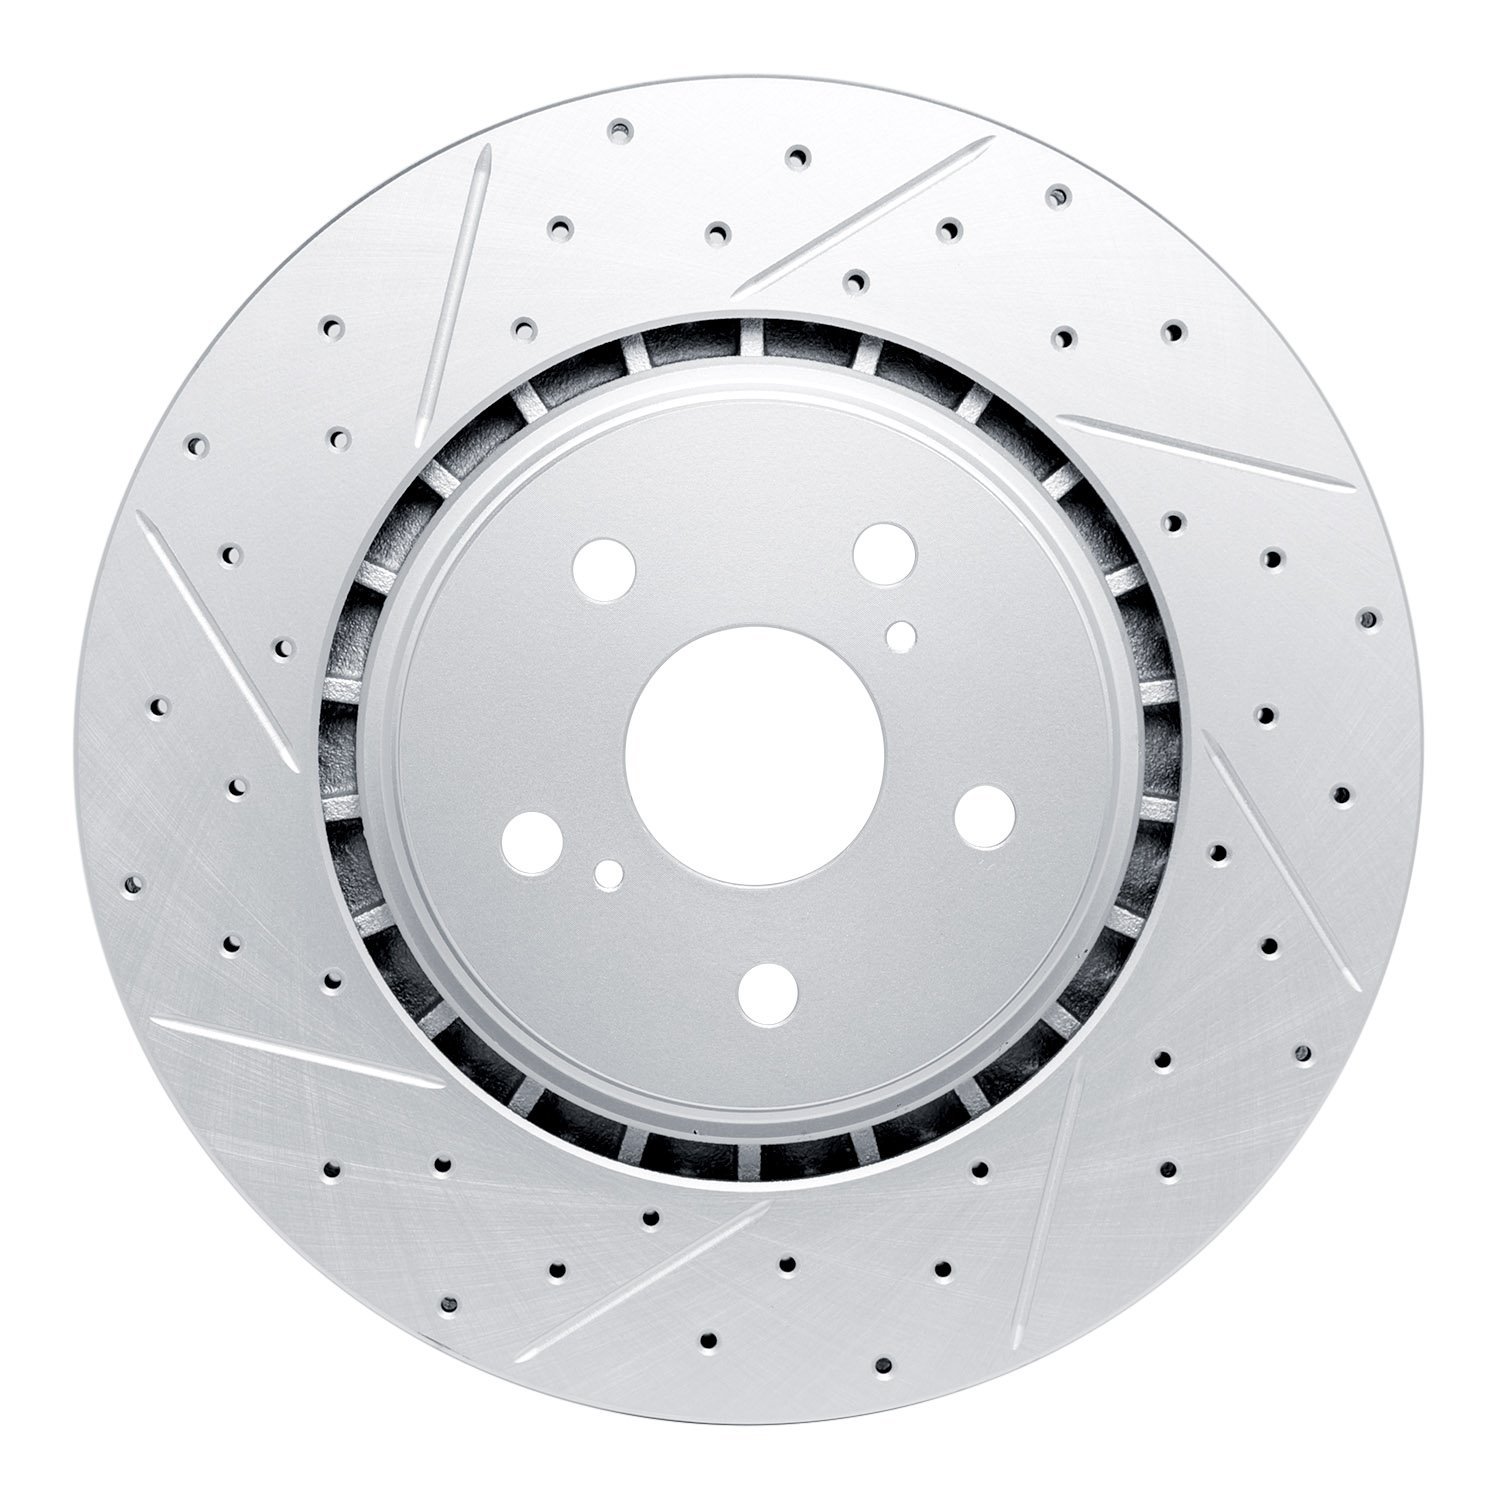 830-75043L Geoperformance Drilled/Slotted Brake Rotor, Fits Select Lexus/Toyota/Scion, Position: Front Left